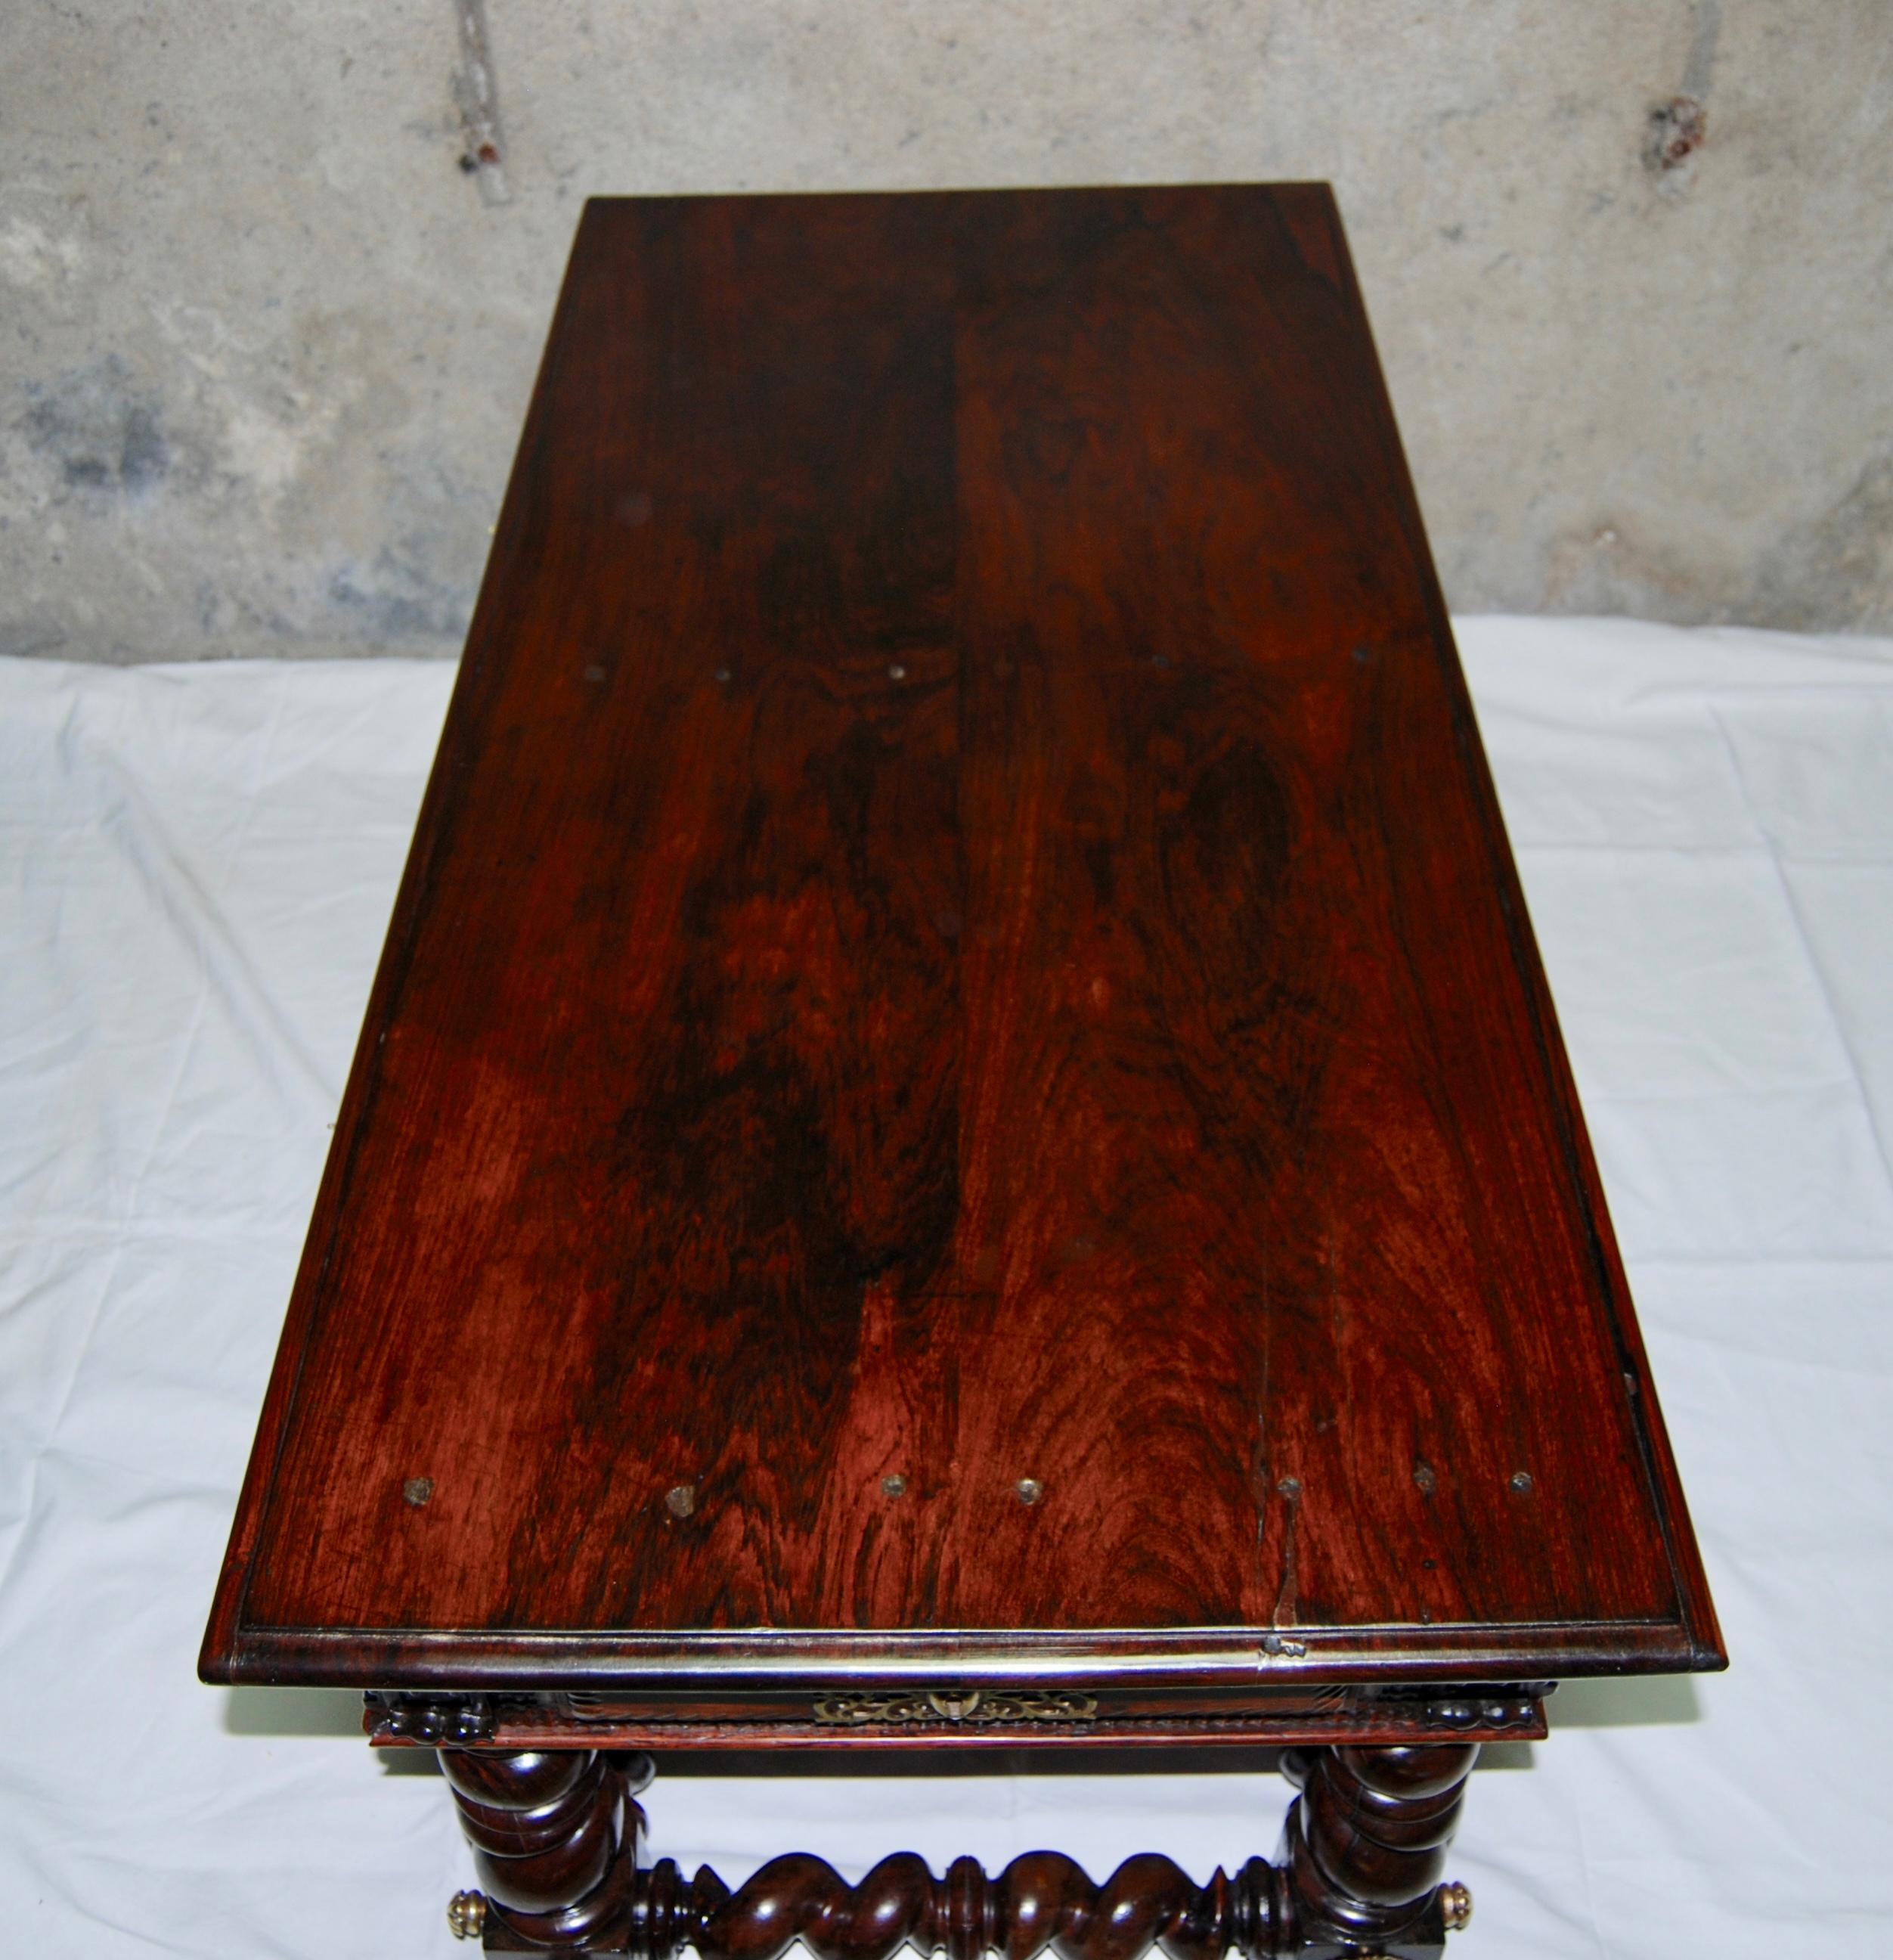 Hand-Carved Solid Rosewood Salon Table, Late 1700s